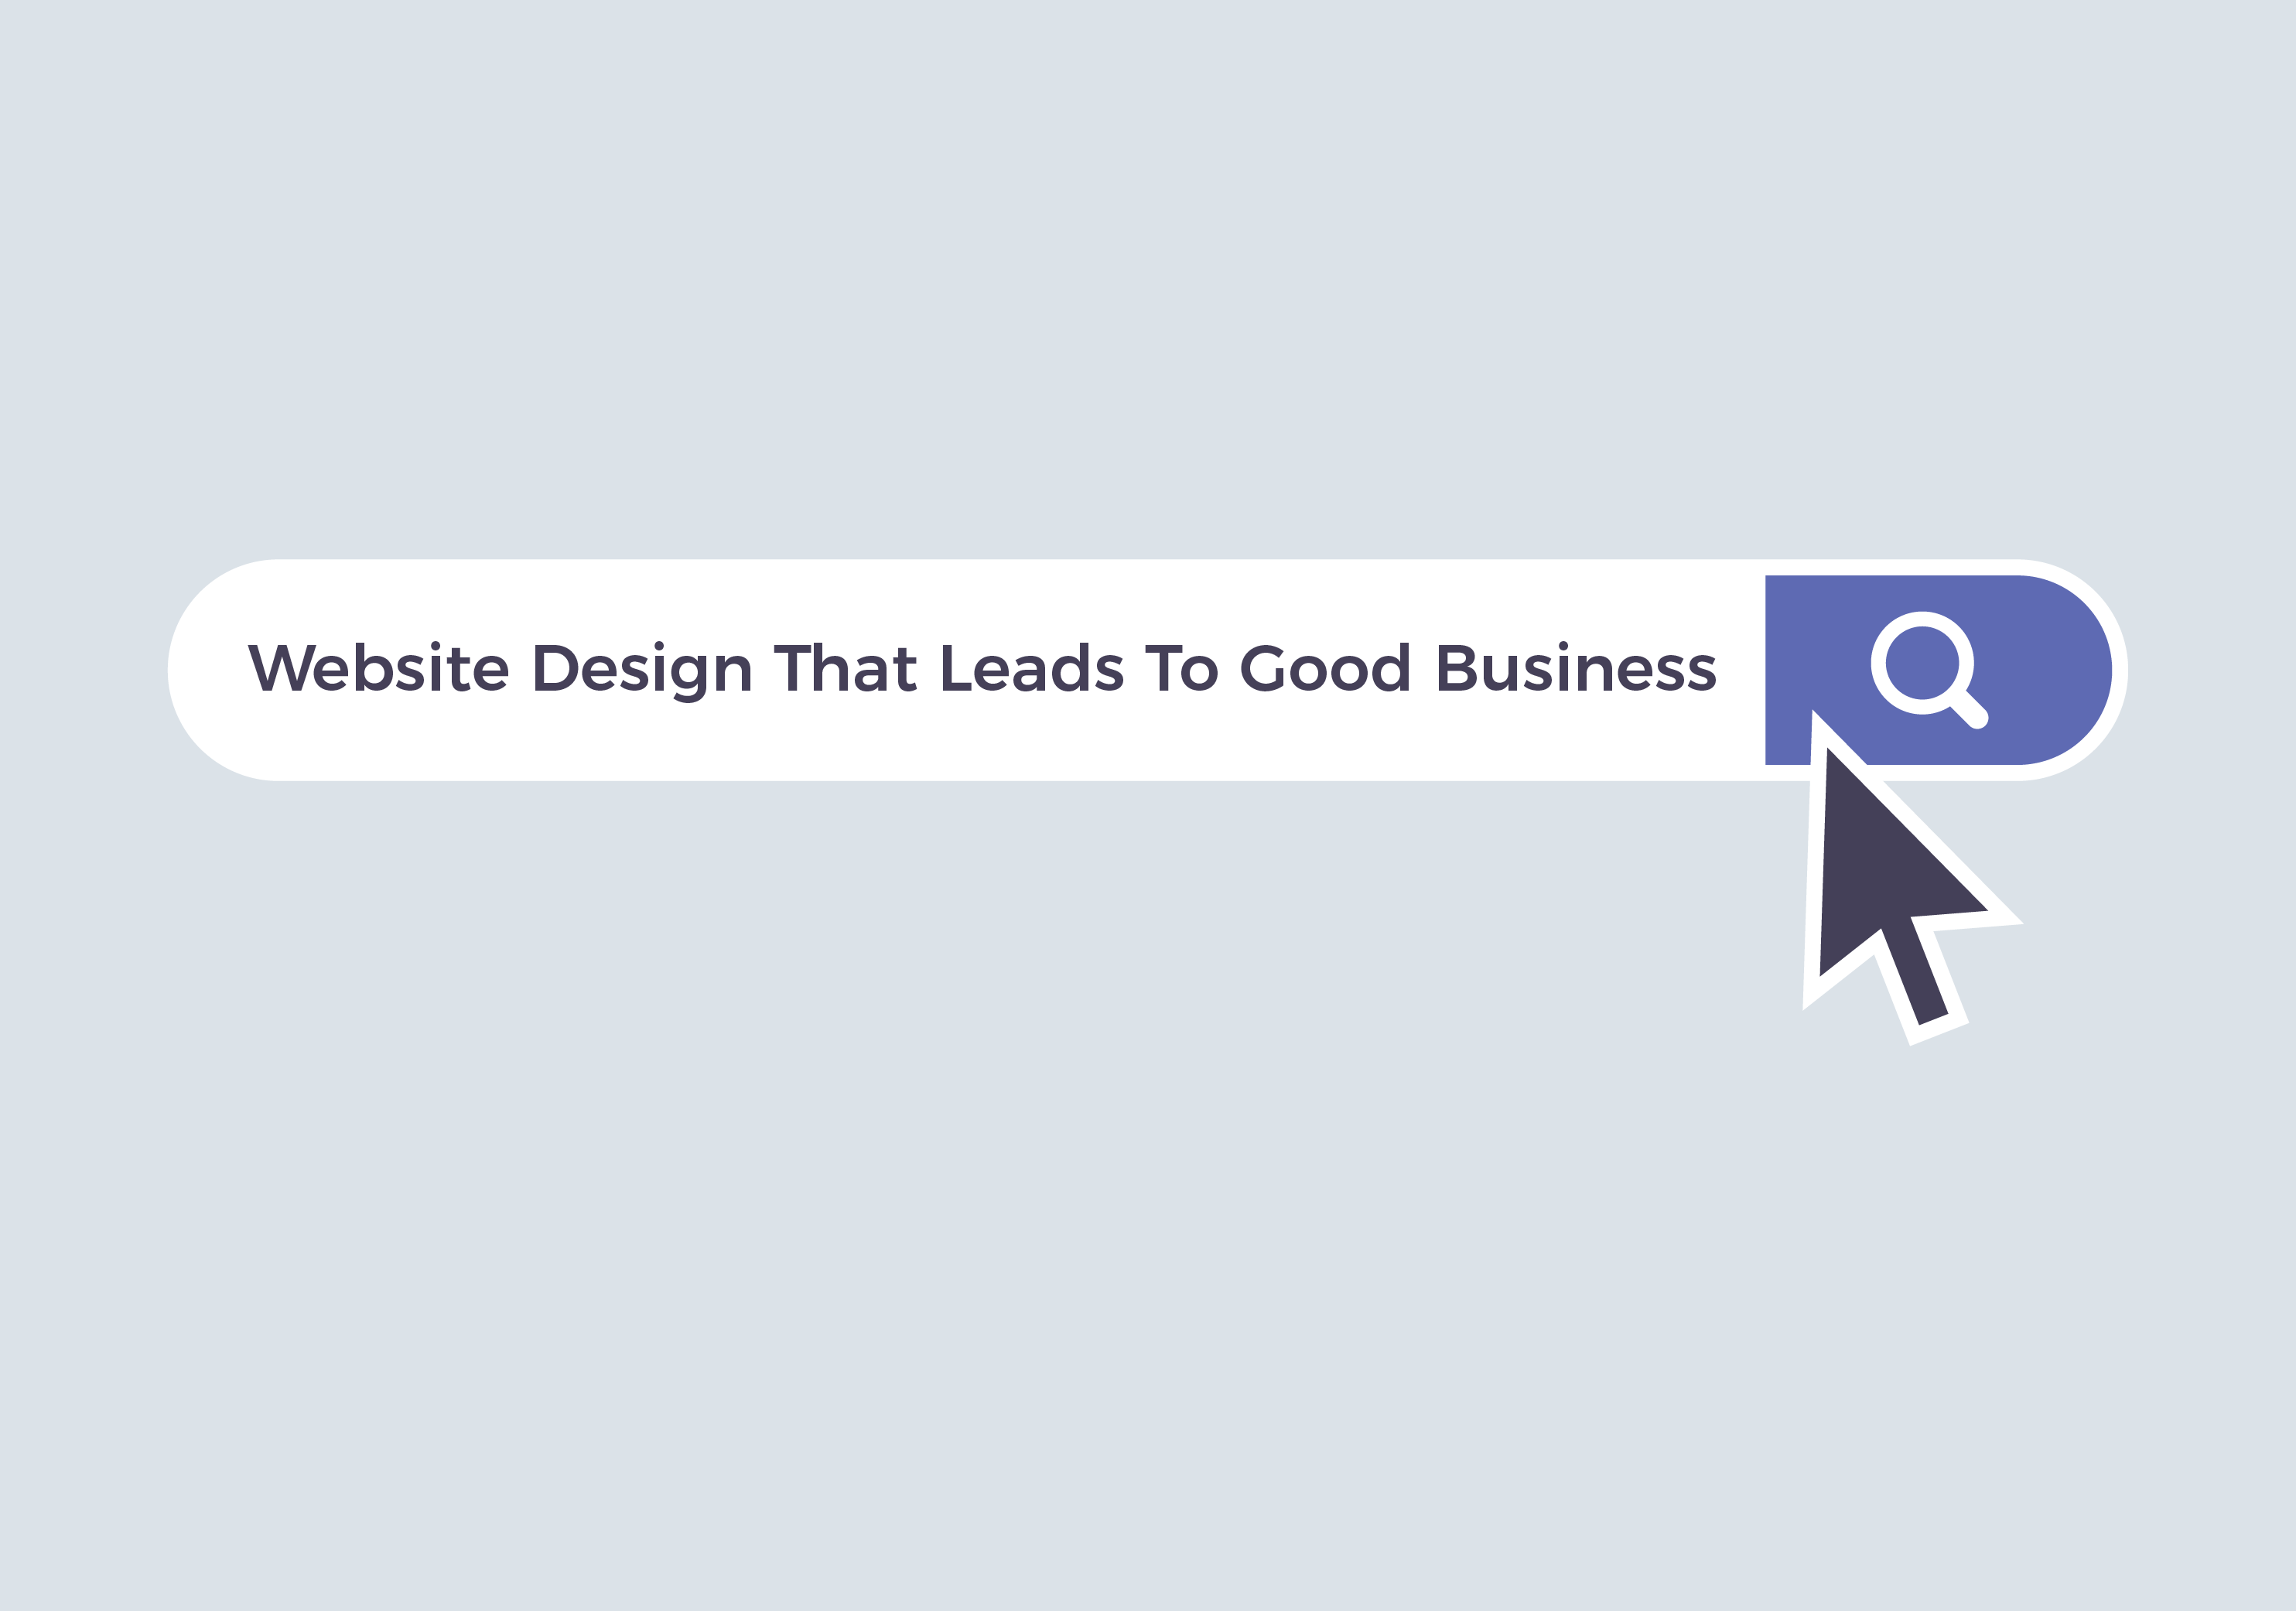 5 Reasons to have a creative website design that leads to good business